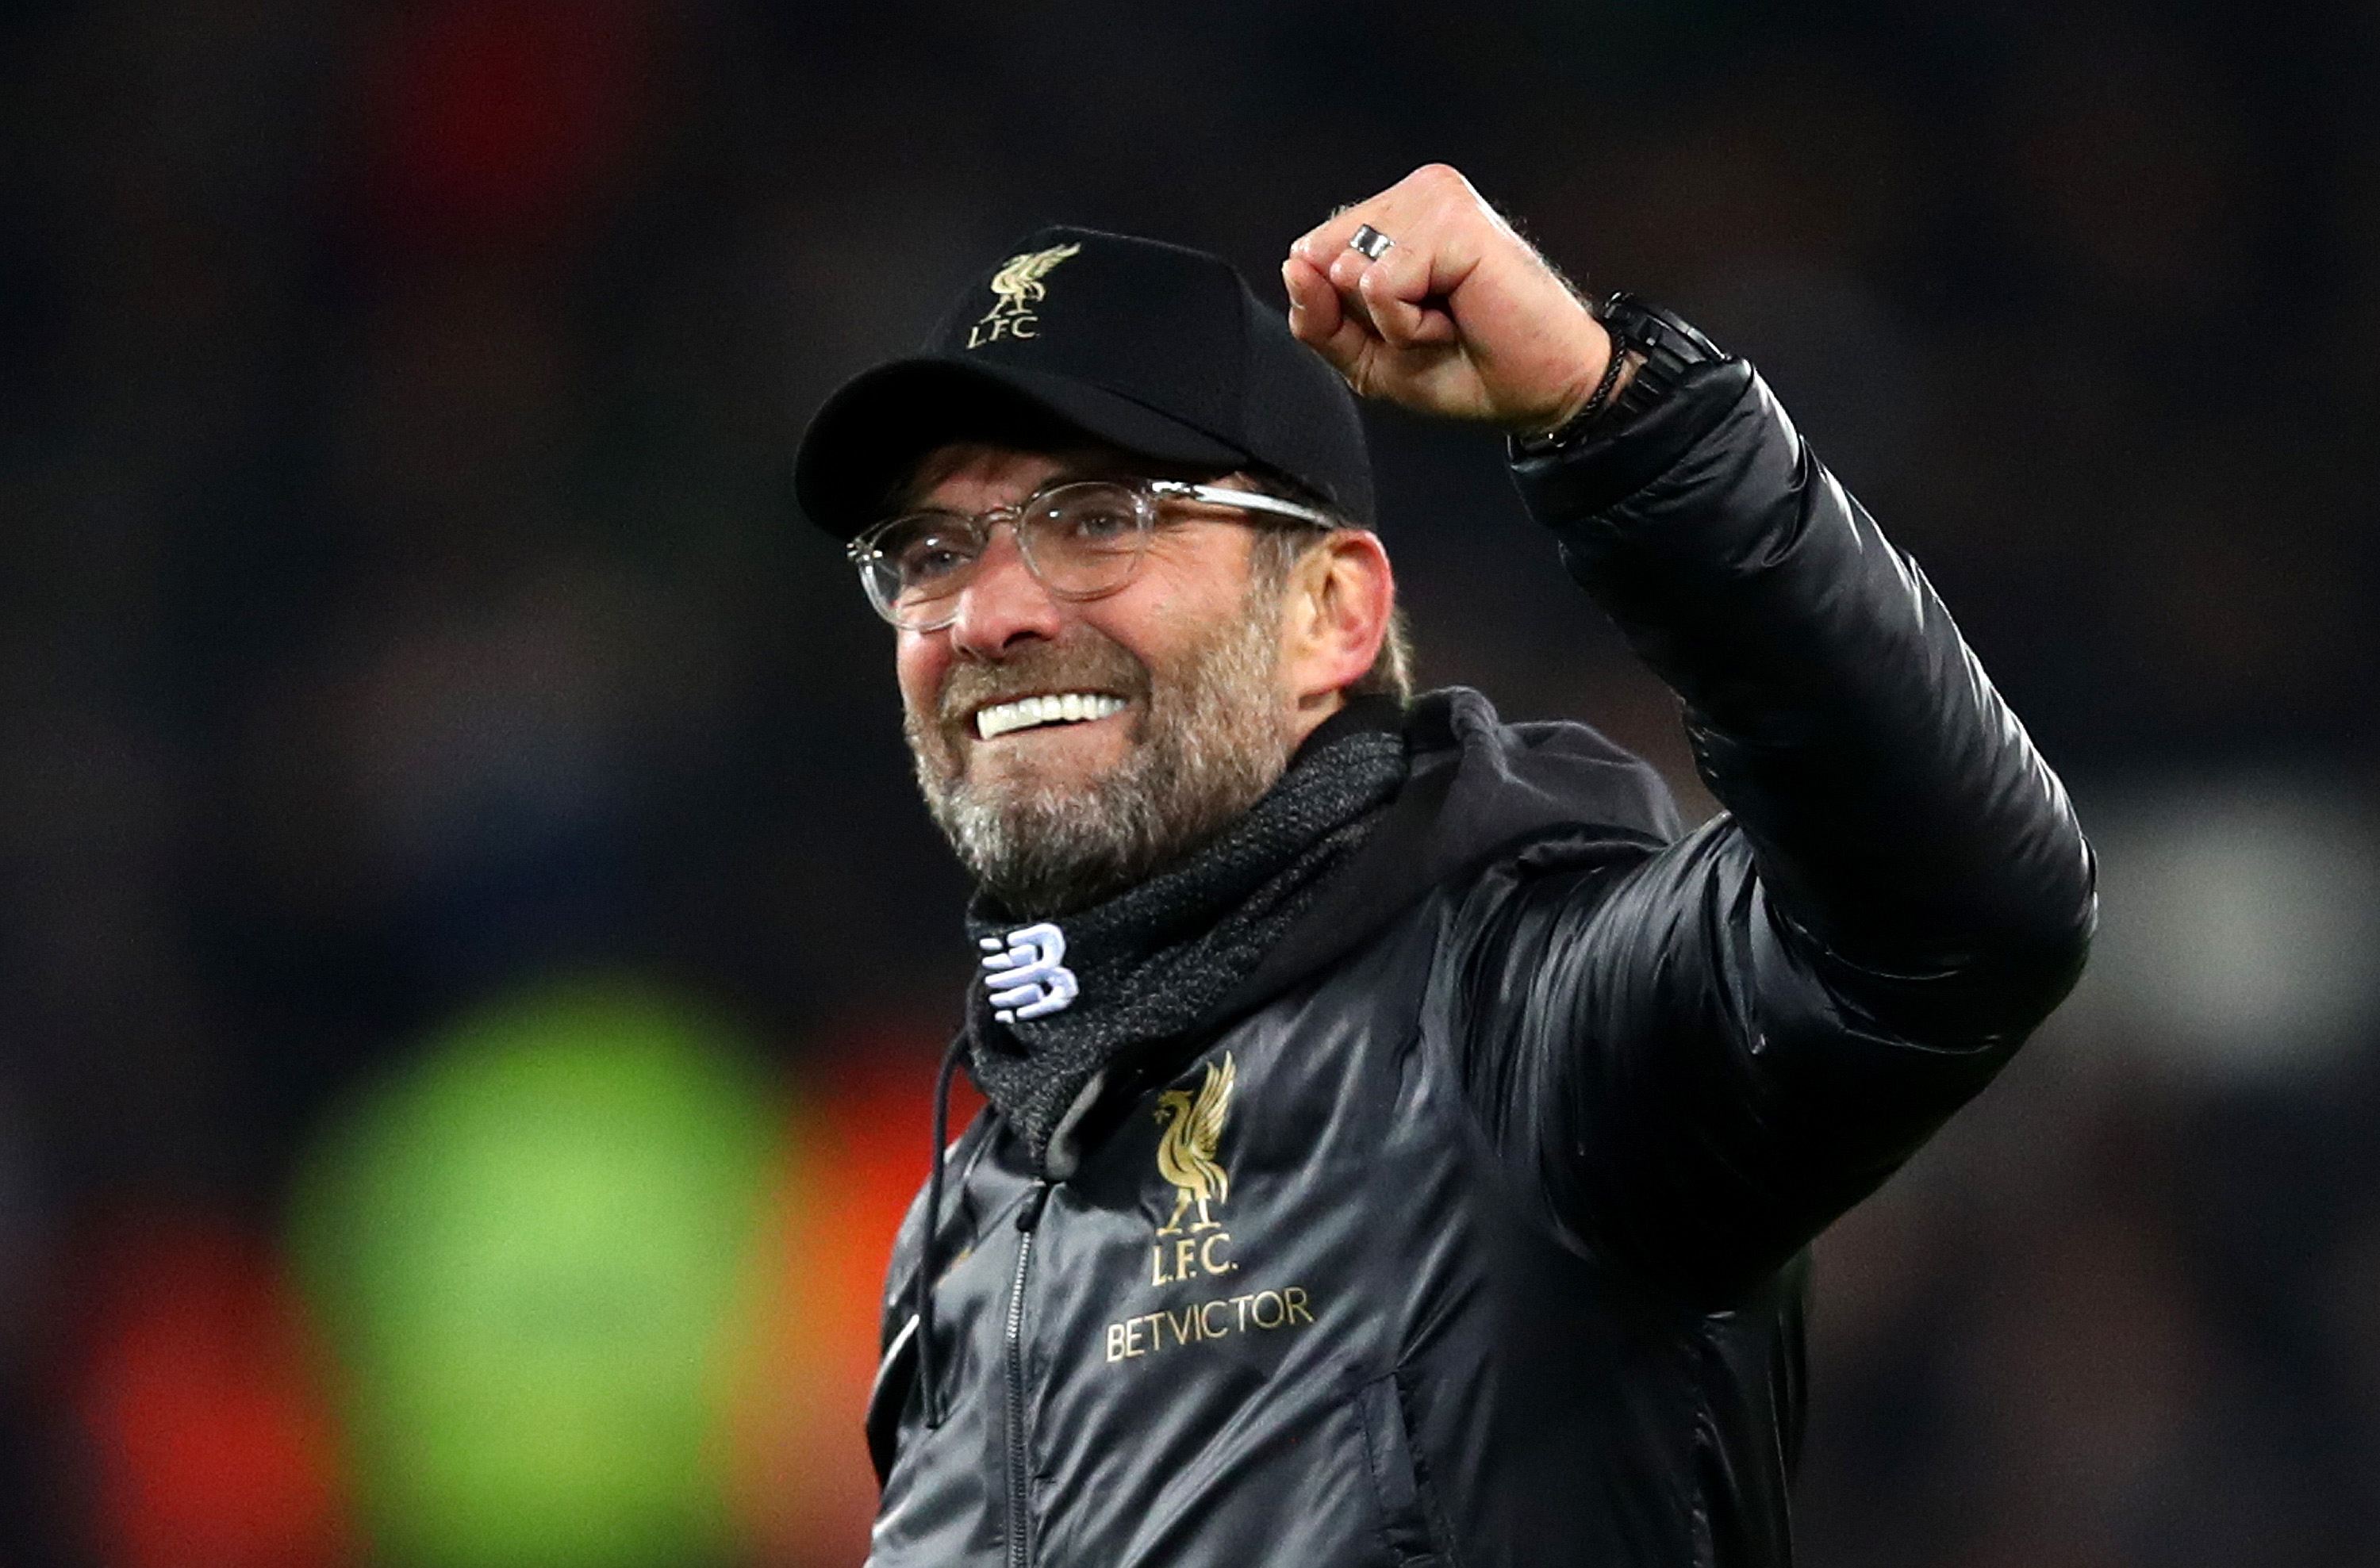 Jurgen Klopp will be grinning from ear to ear after dismantling Manchester United. (Photo by Clive Brunskill/Getty Images)